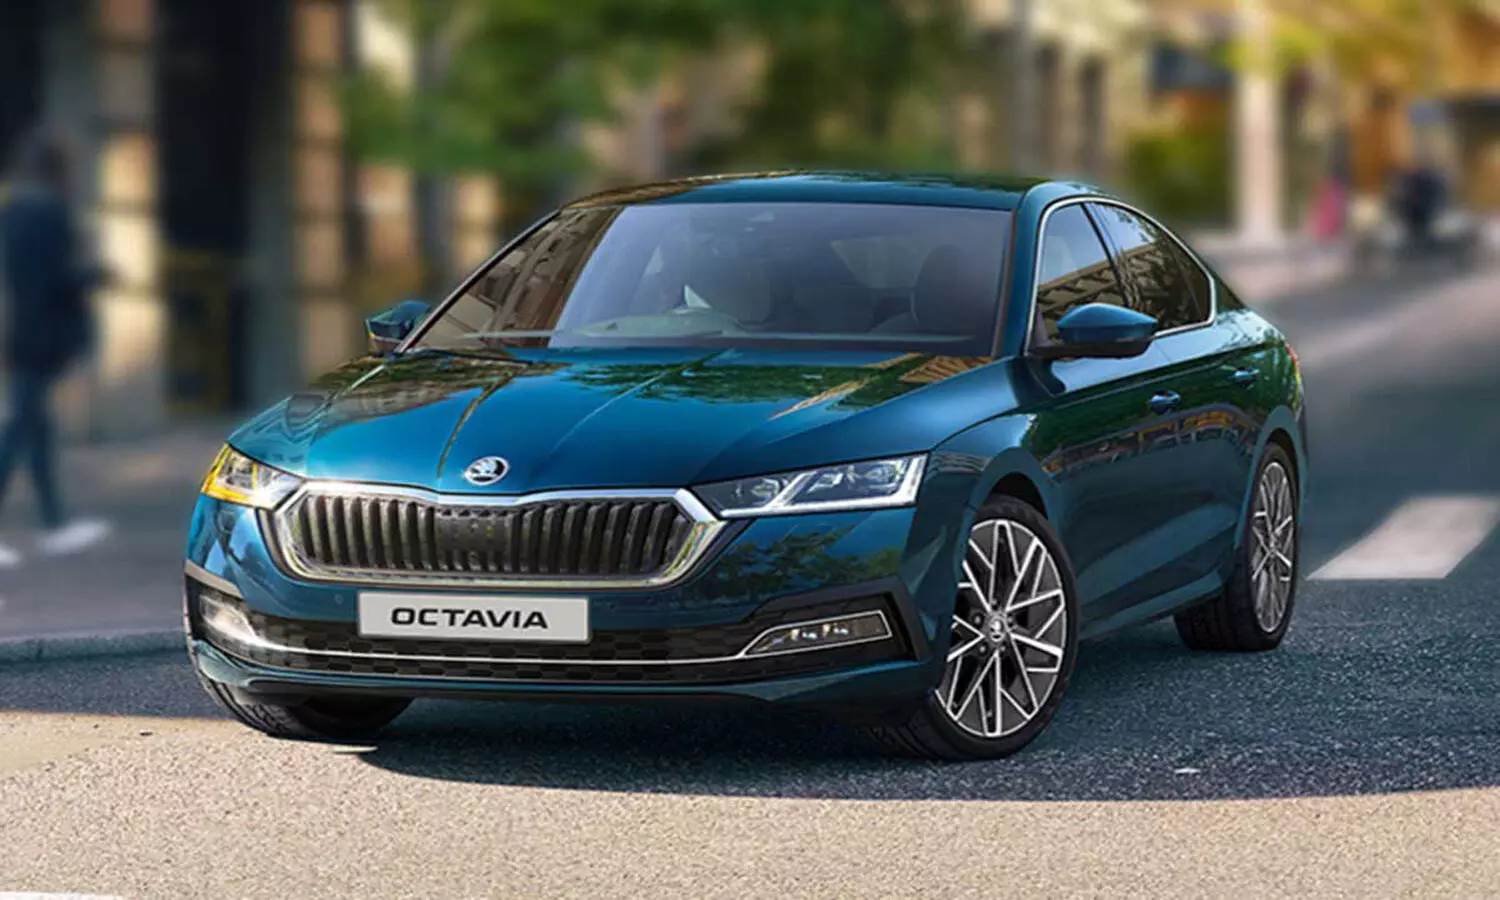 Skoda Is Planning to Launch 6 Superb Cars in 2022